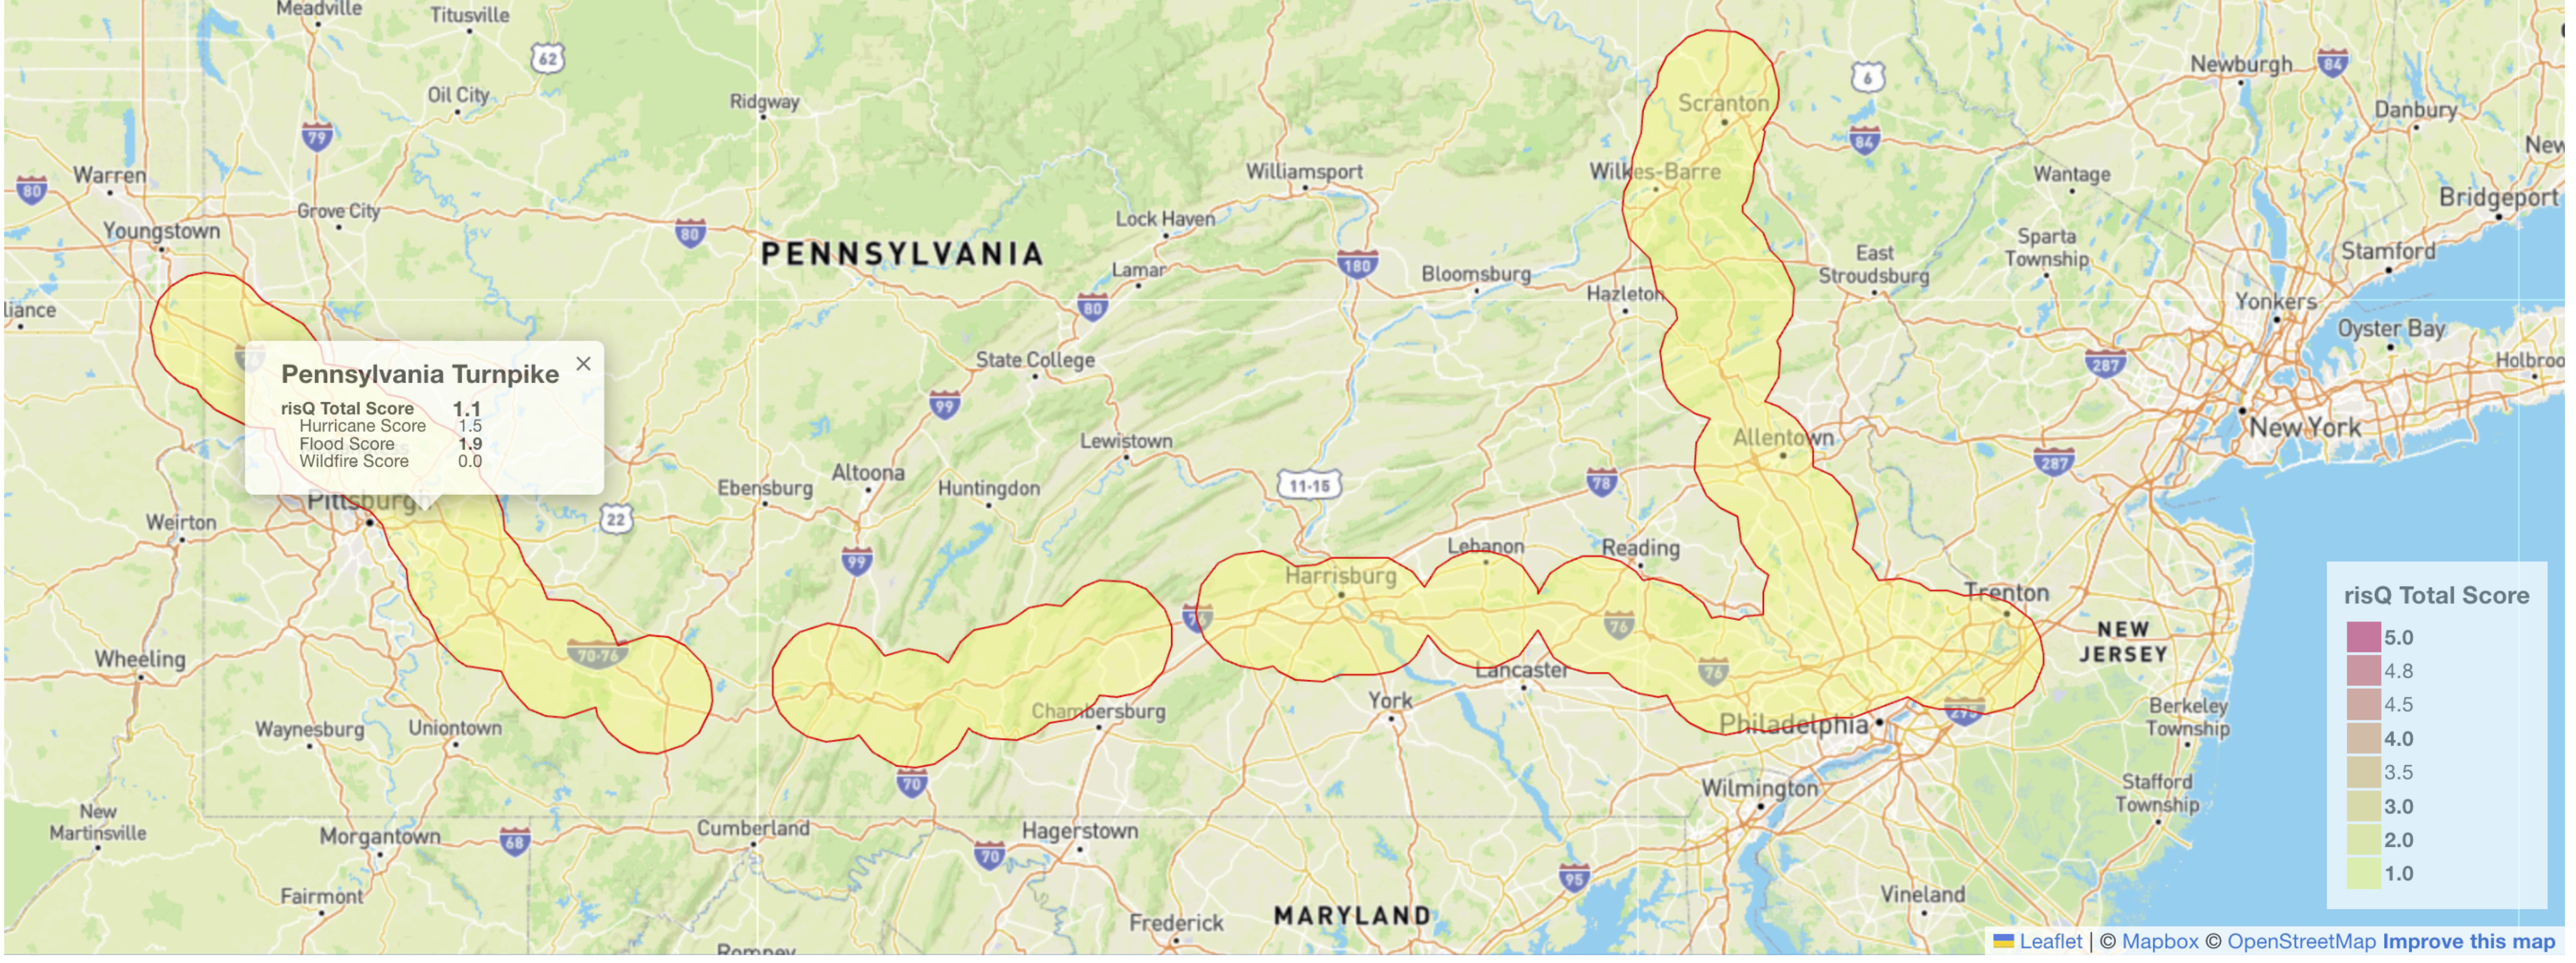 FIGURE 5. Geographic boundaries (red) marking the areas within a 10-mile radius of all the Pennsylvania Turnpike’s ingress/egress locations, strung together into a chain. Source: ICE Sustainable Finance as of 3/15/2024.